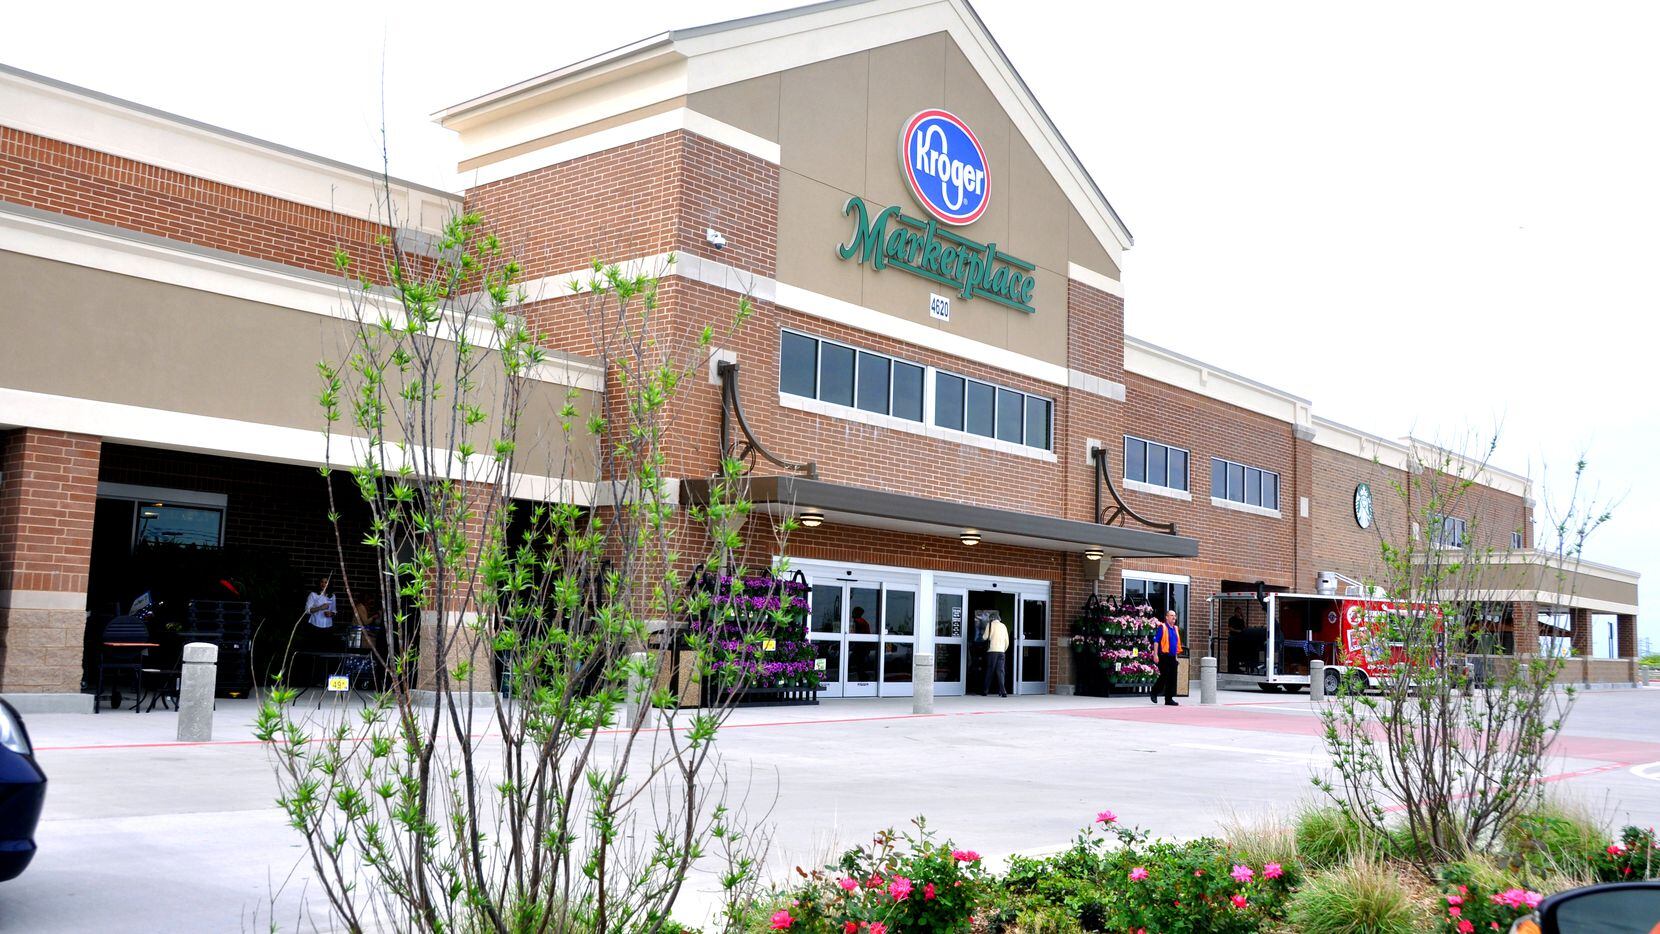 Kroger has almost 100 stores in North Texas.